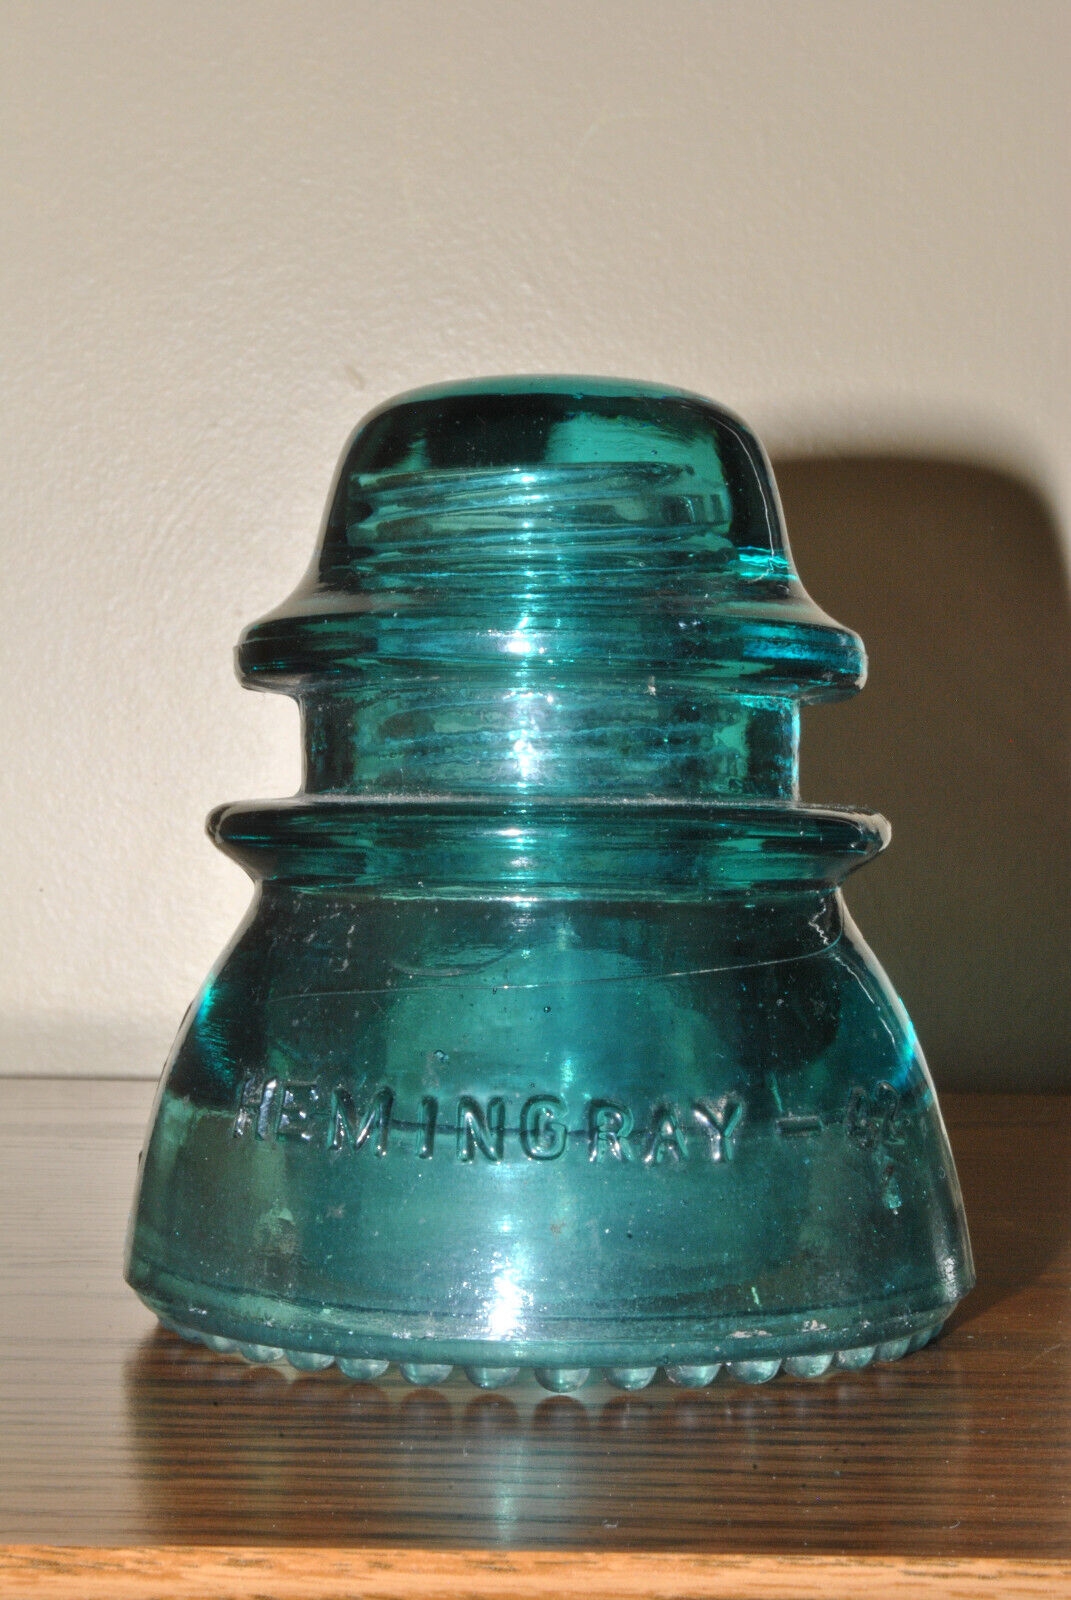 Vintage Teal Blue  Hemingray 42 Electrical Glass Insulator - Made in USA